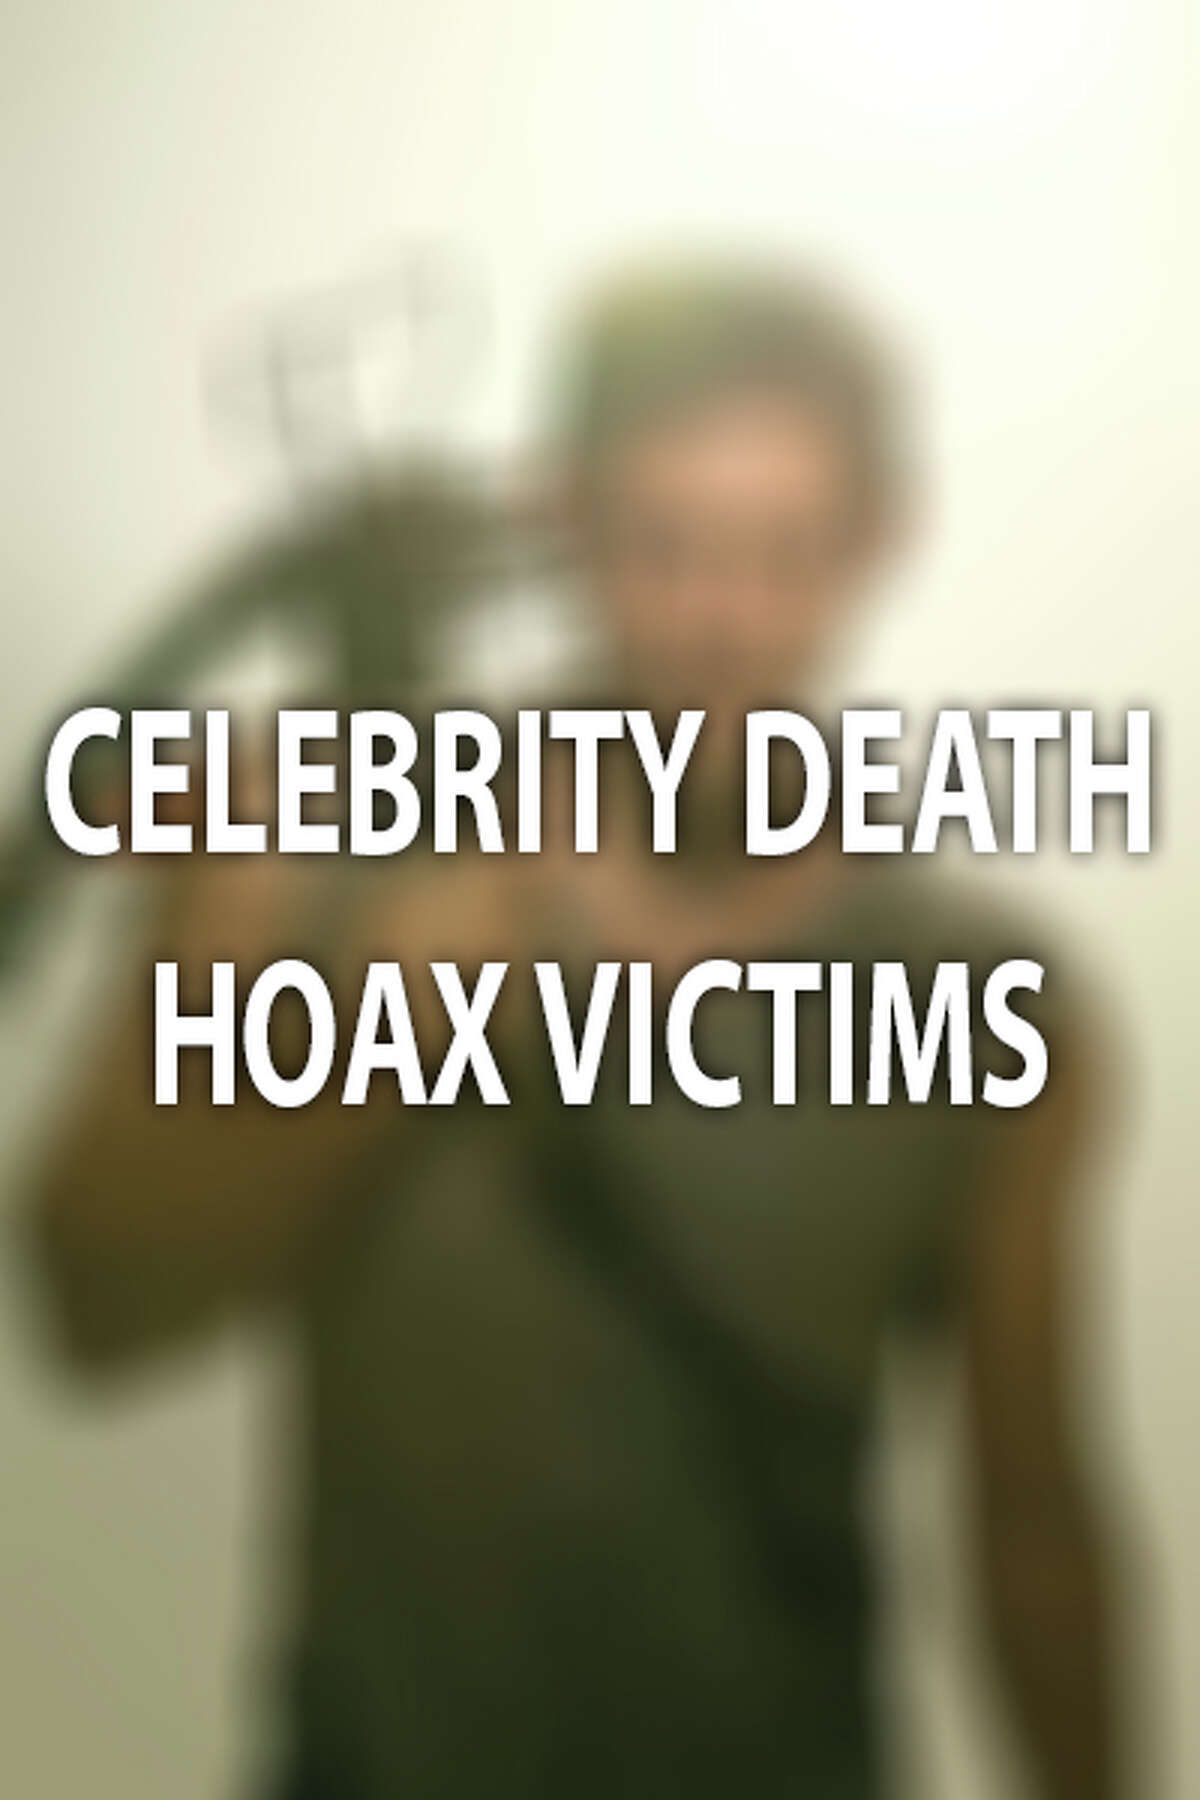 What celebrities have been thought to be dead, announced all over the news  of their death, only for the celebrity to actually still be alive? - Quora